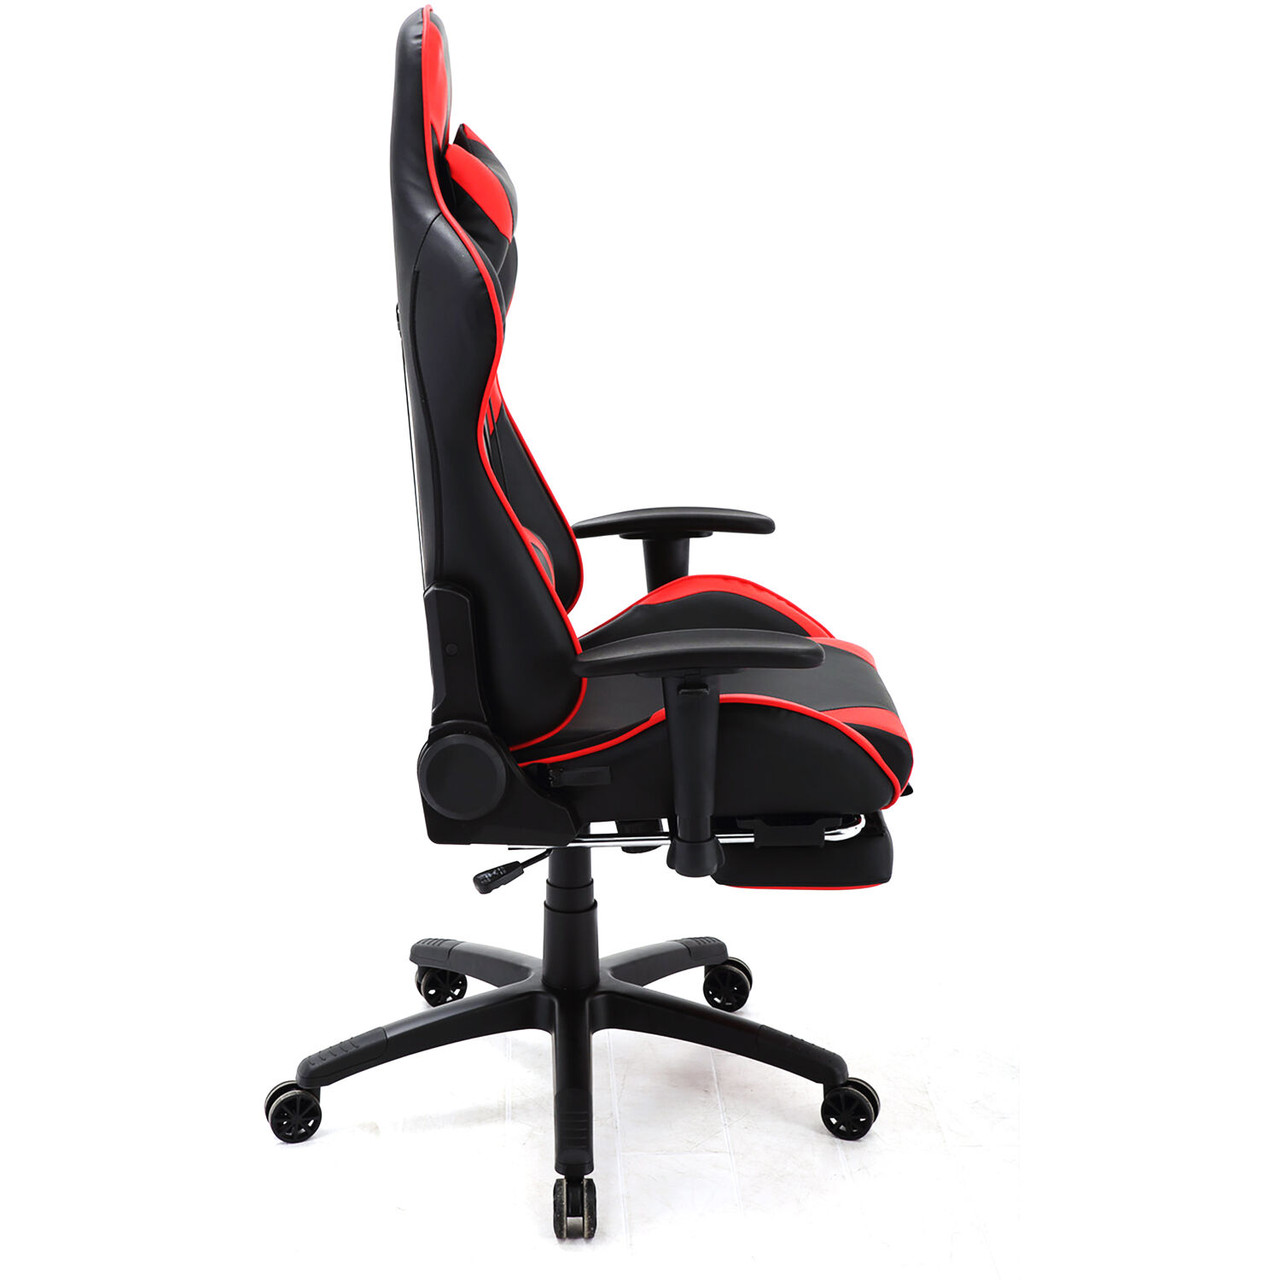 Hanover Commando Ergonomic Gaming Chair in Black and Orange - Adjustable GAS Lift Seating, Lumbar and Neck Support